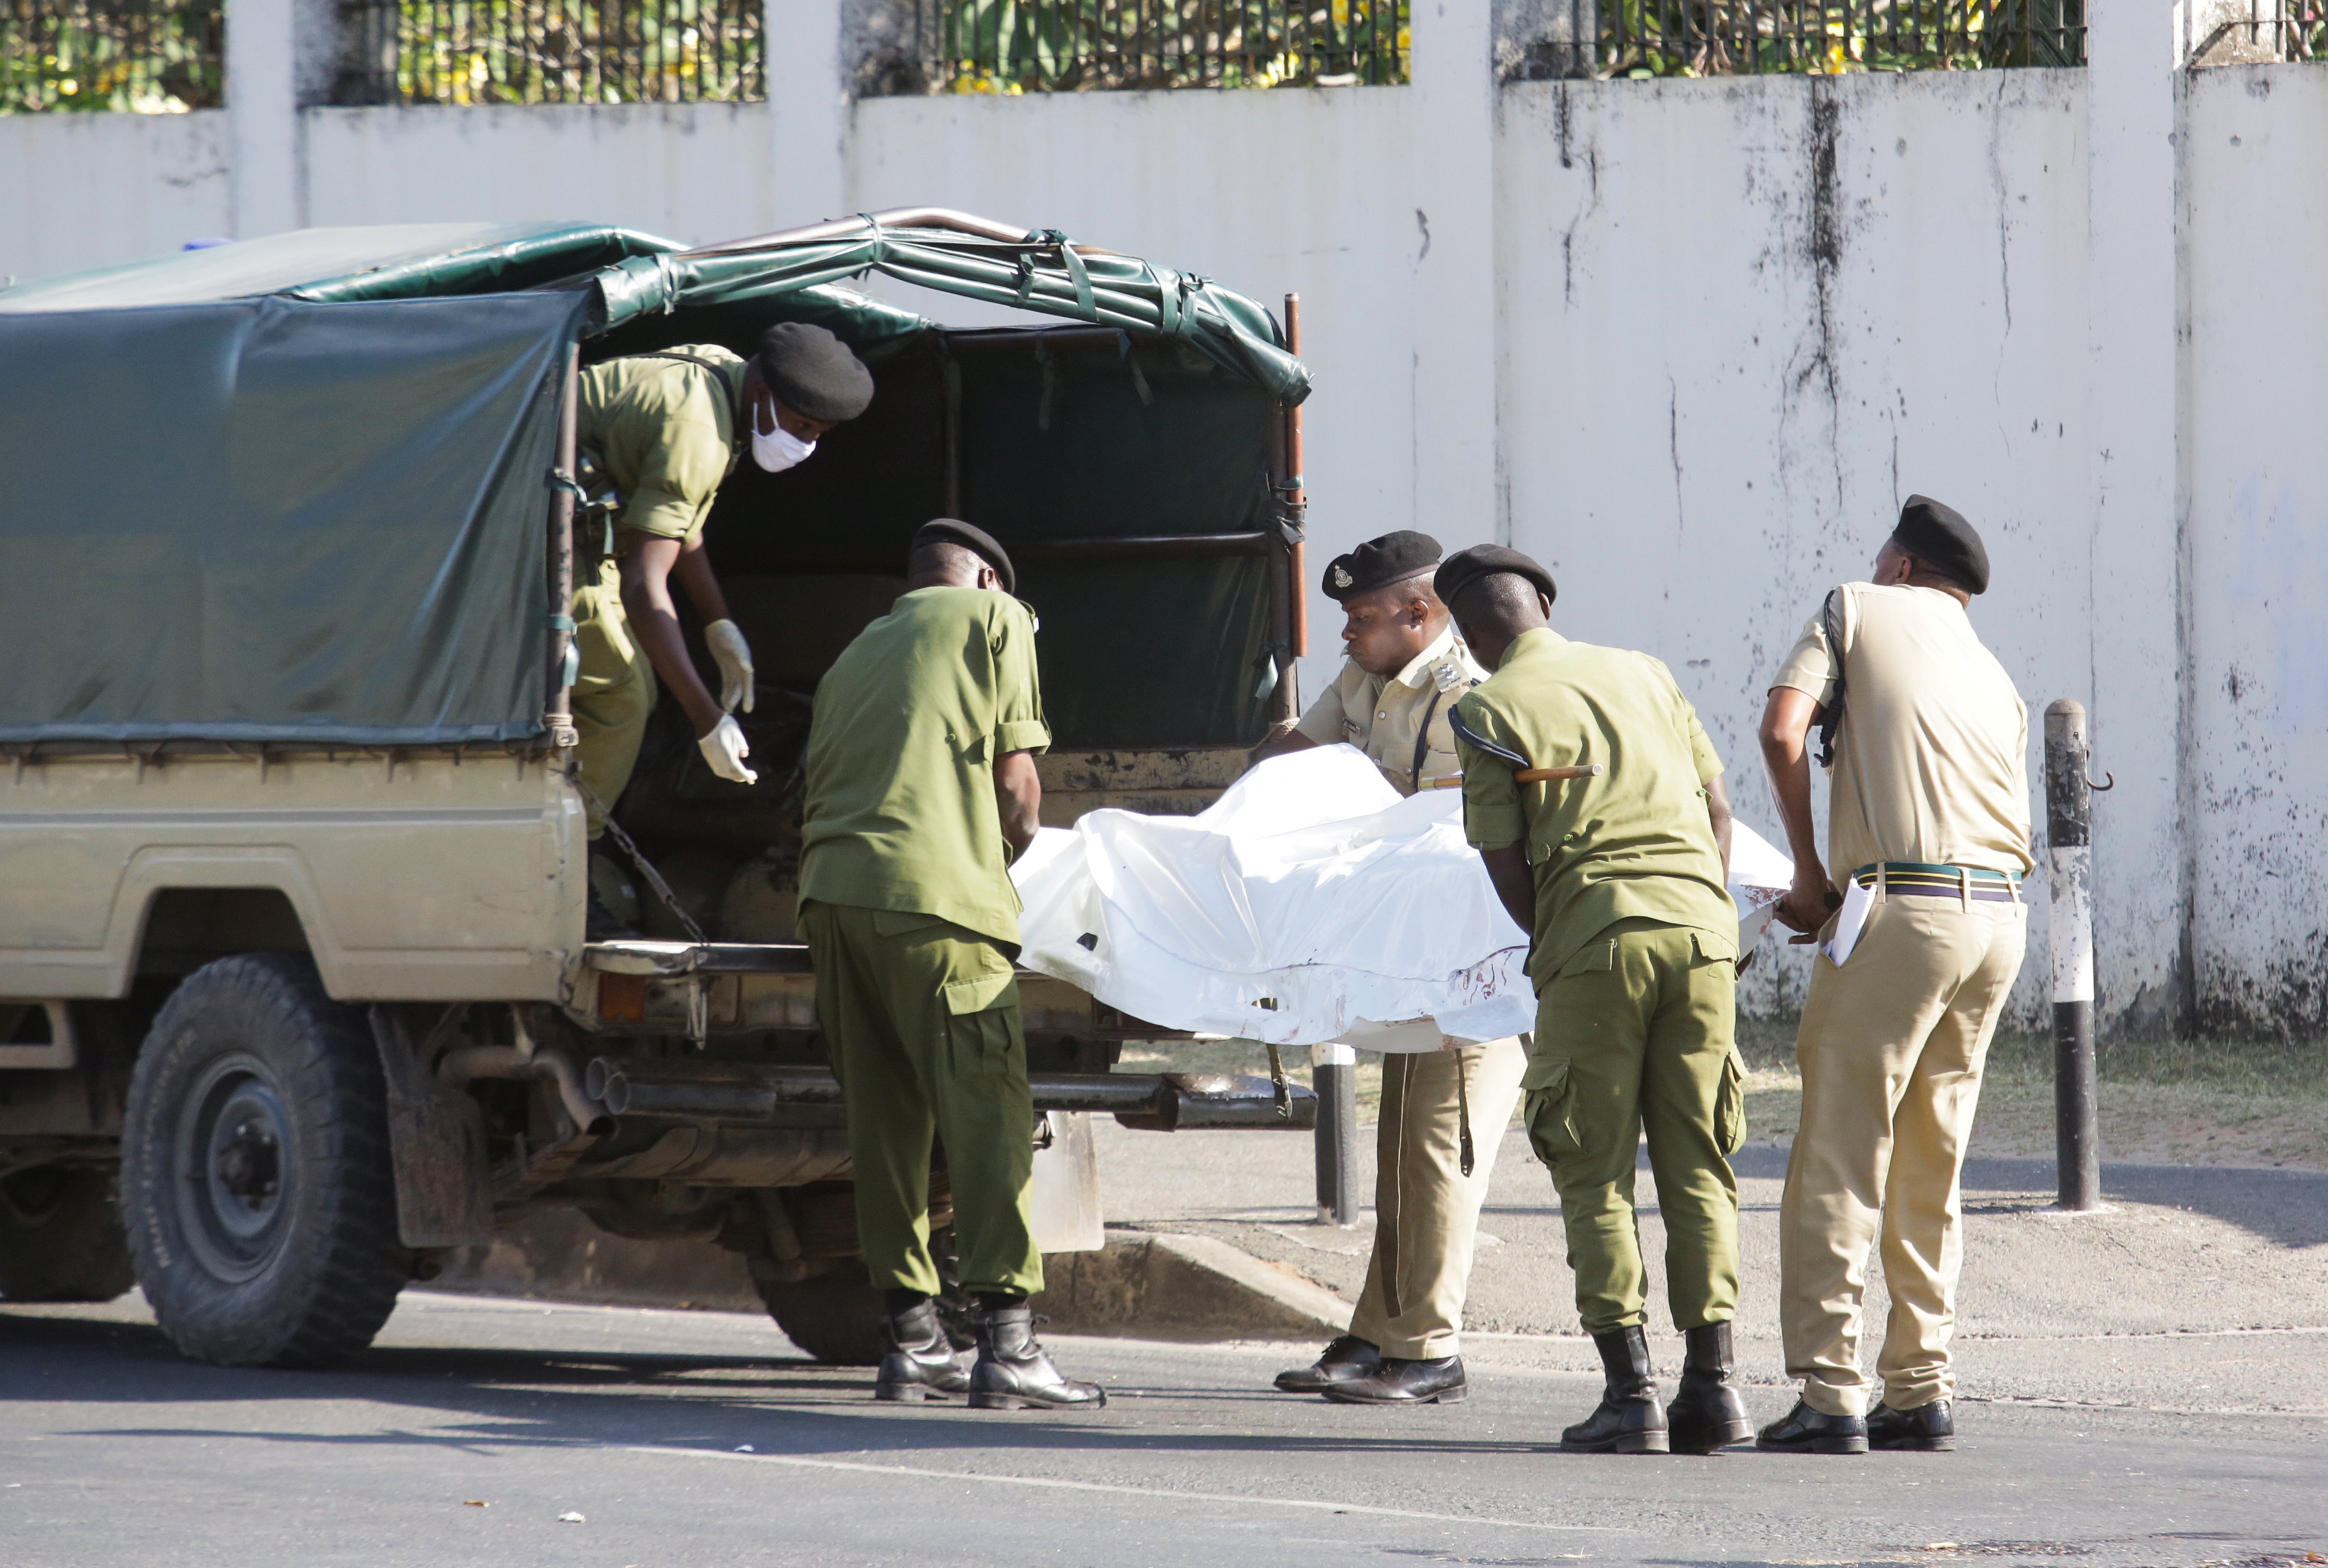 Tanzanian security forces remove the slain body of an attacker who was wielding an assault rifle, outside the French embassy in the Salenda area of Dar es Salaam